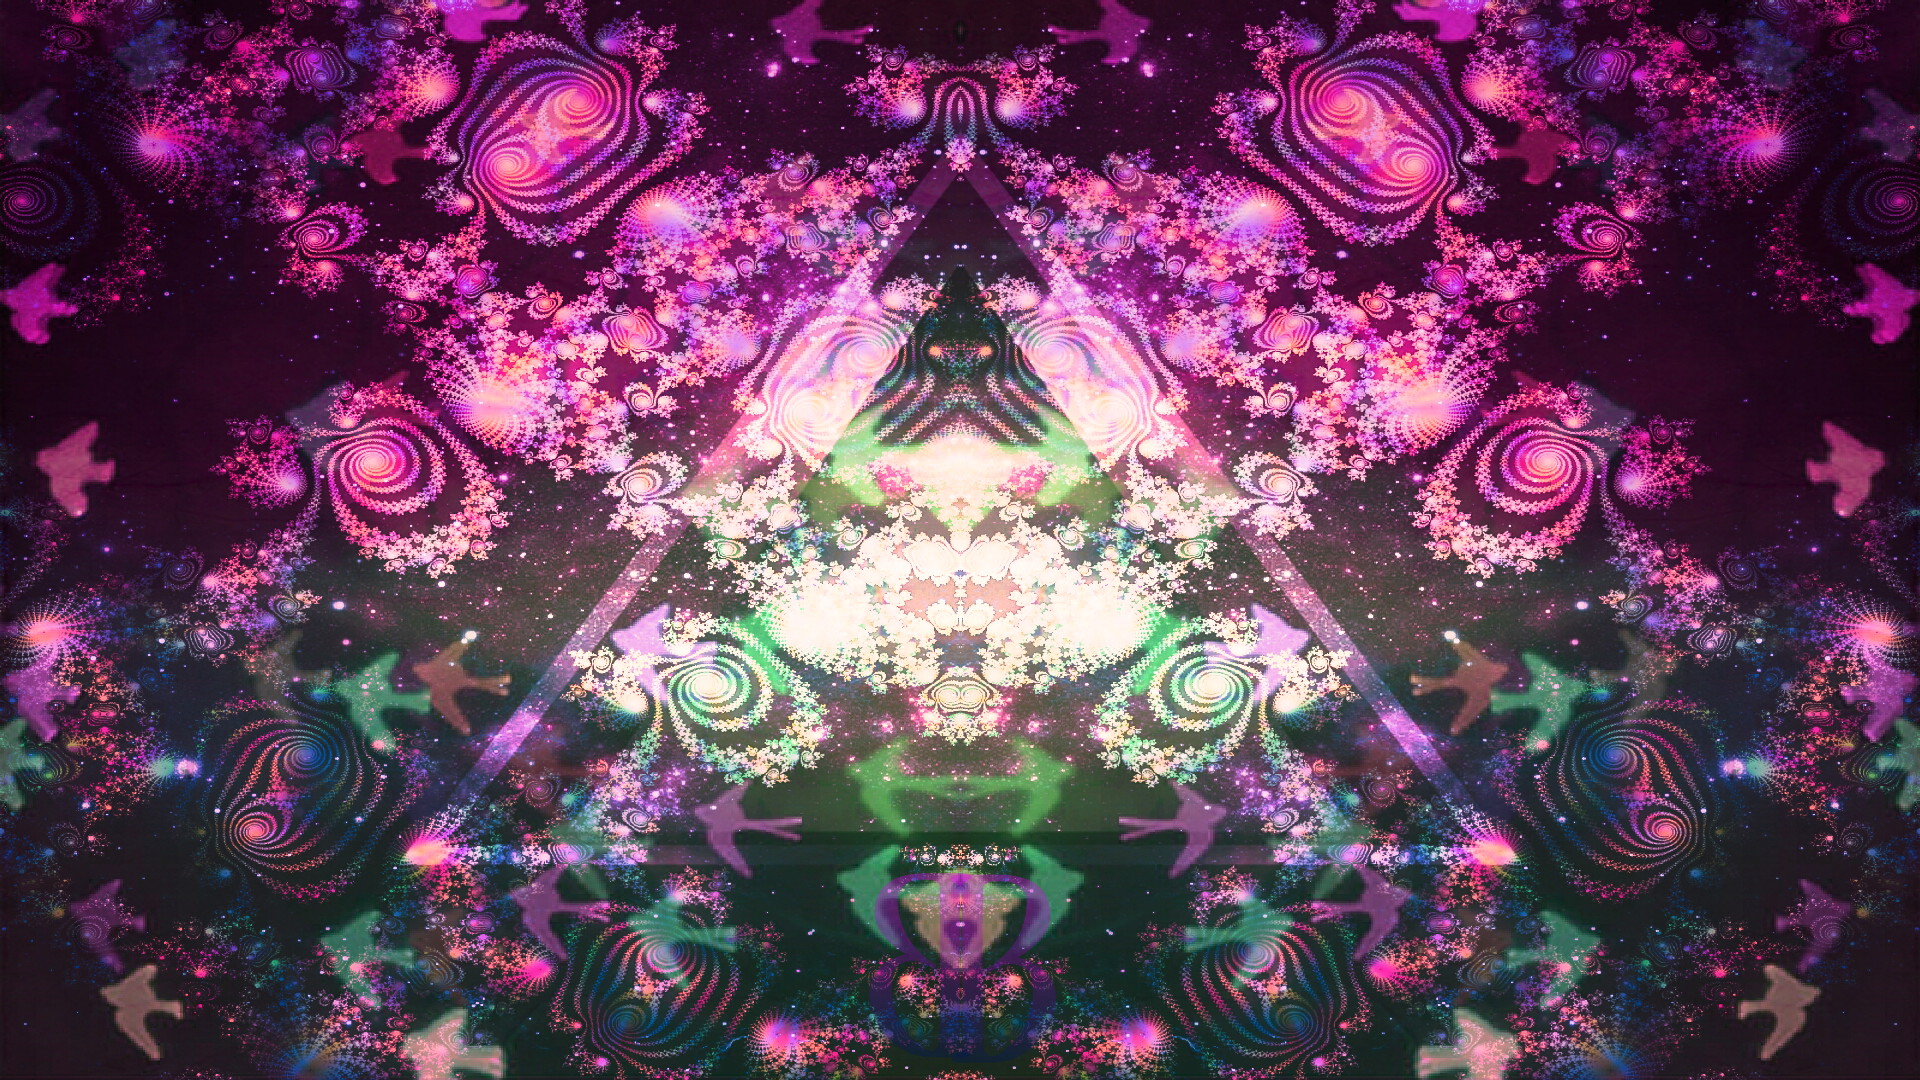 Psychedelic  Free Stock Photos